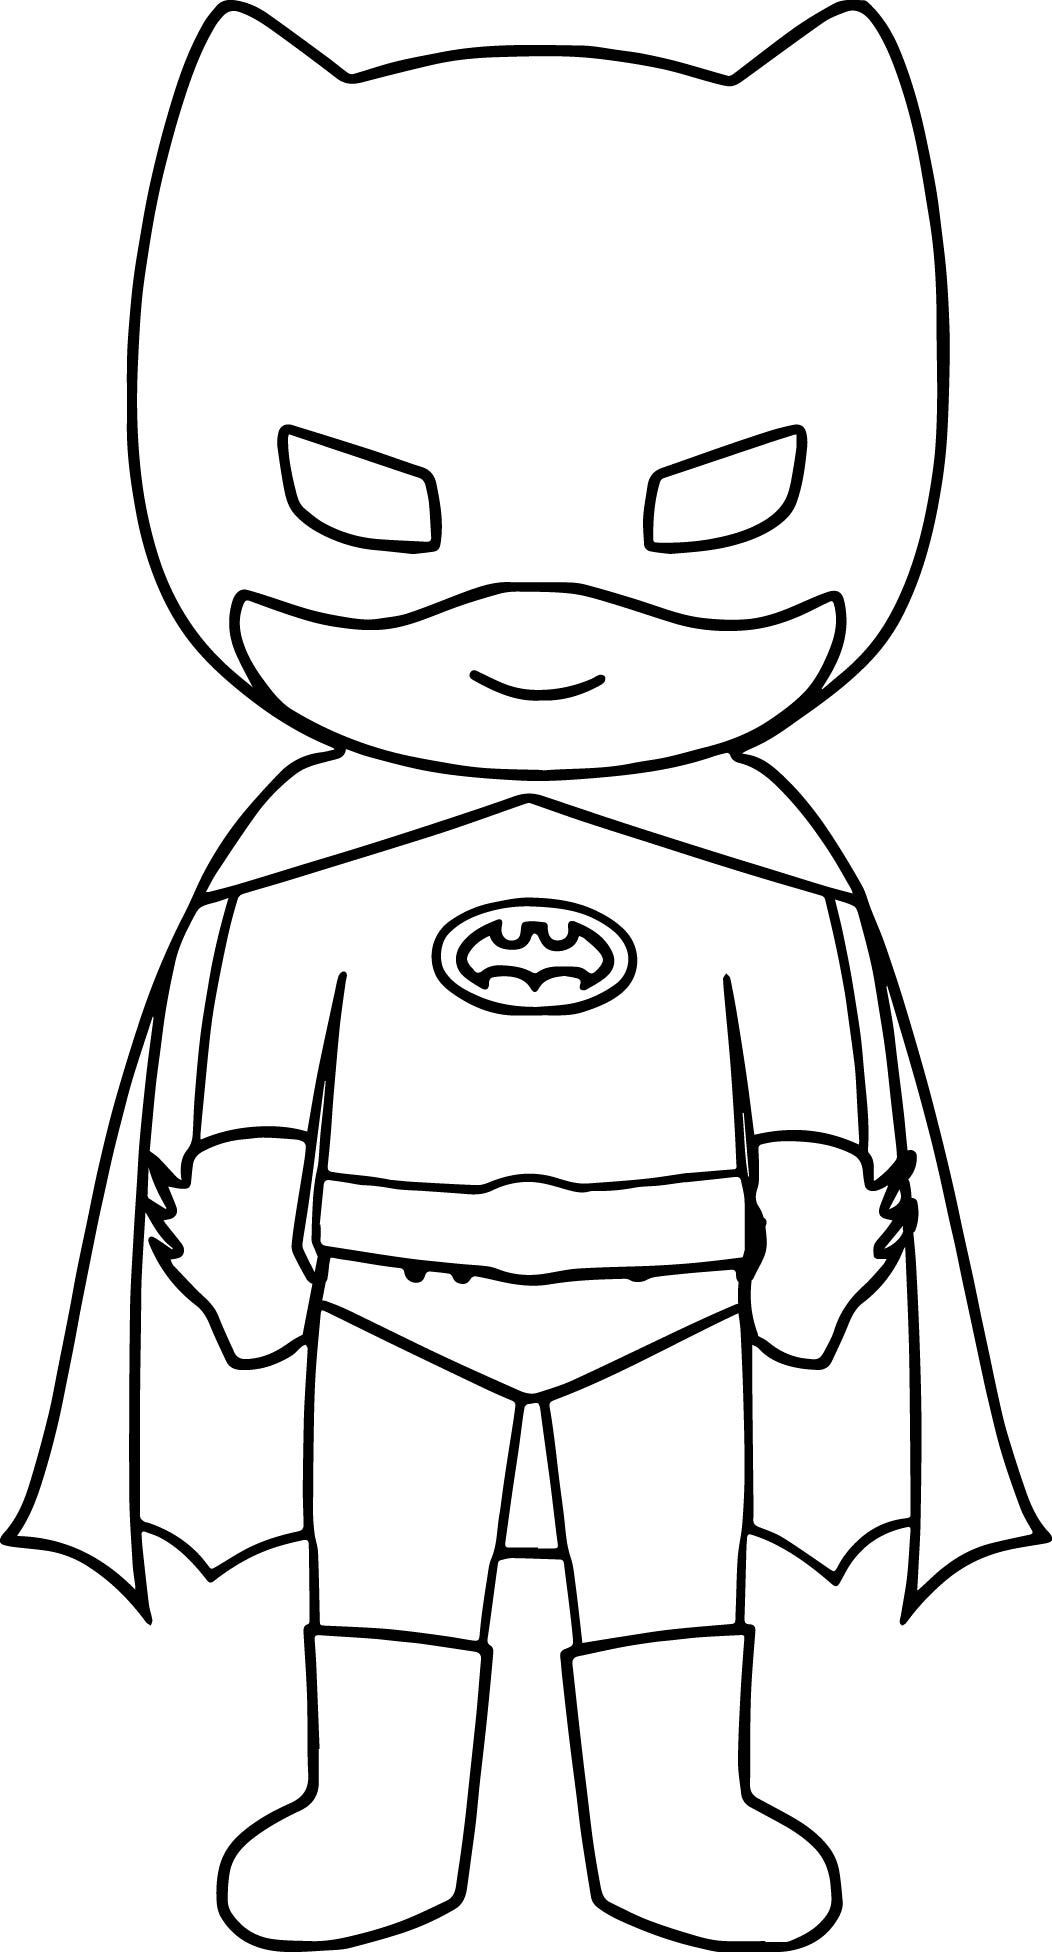 Superhero Coloring Pages For Boys
 cool Bat Superhero Kids Coloring Page